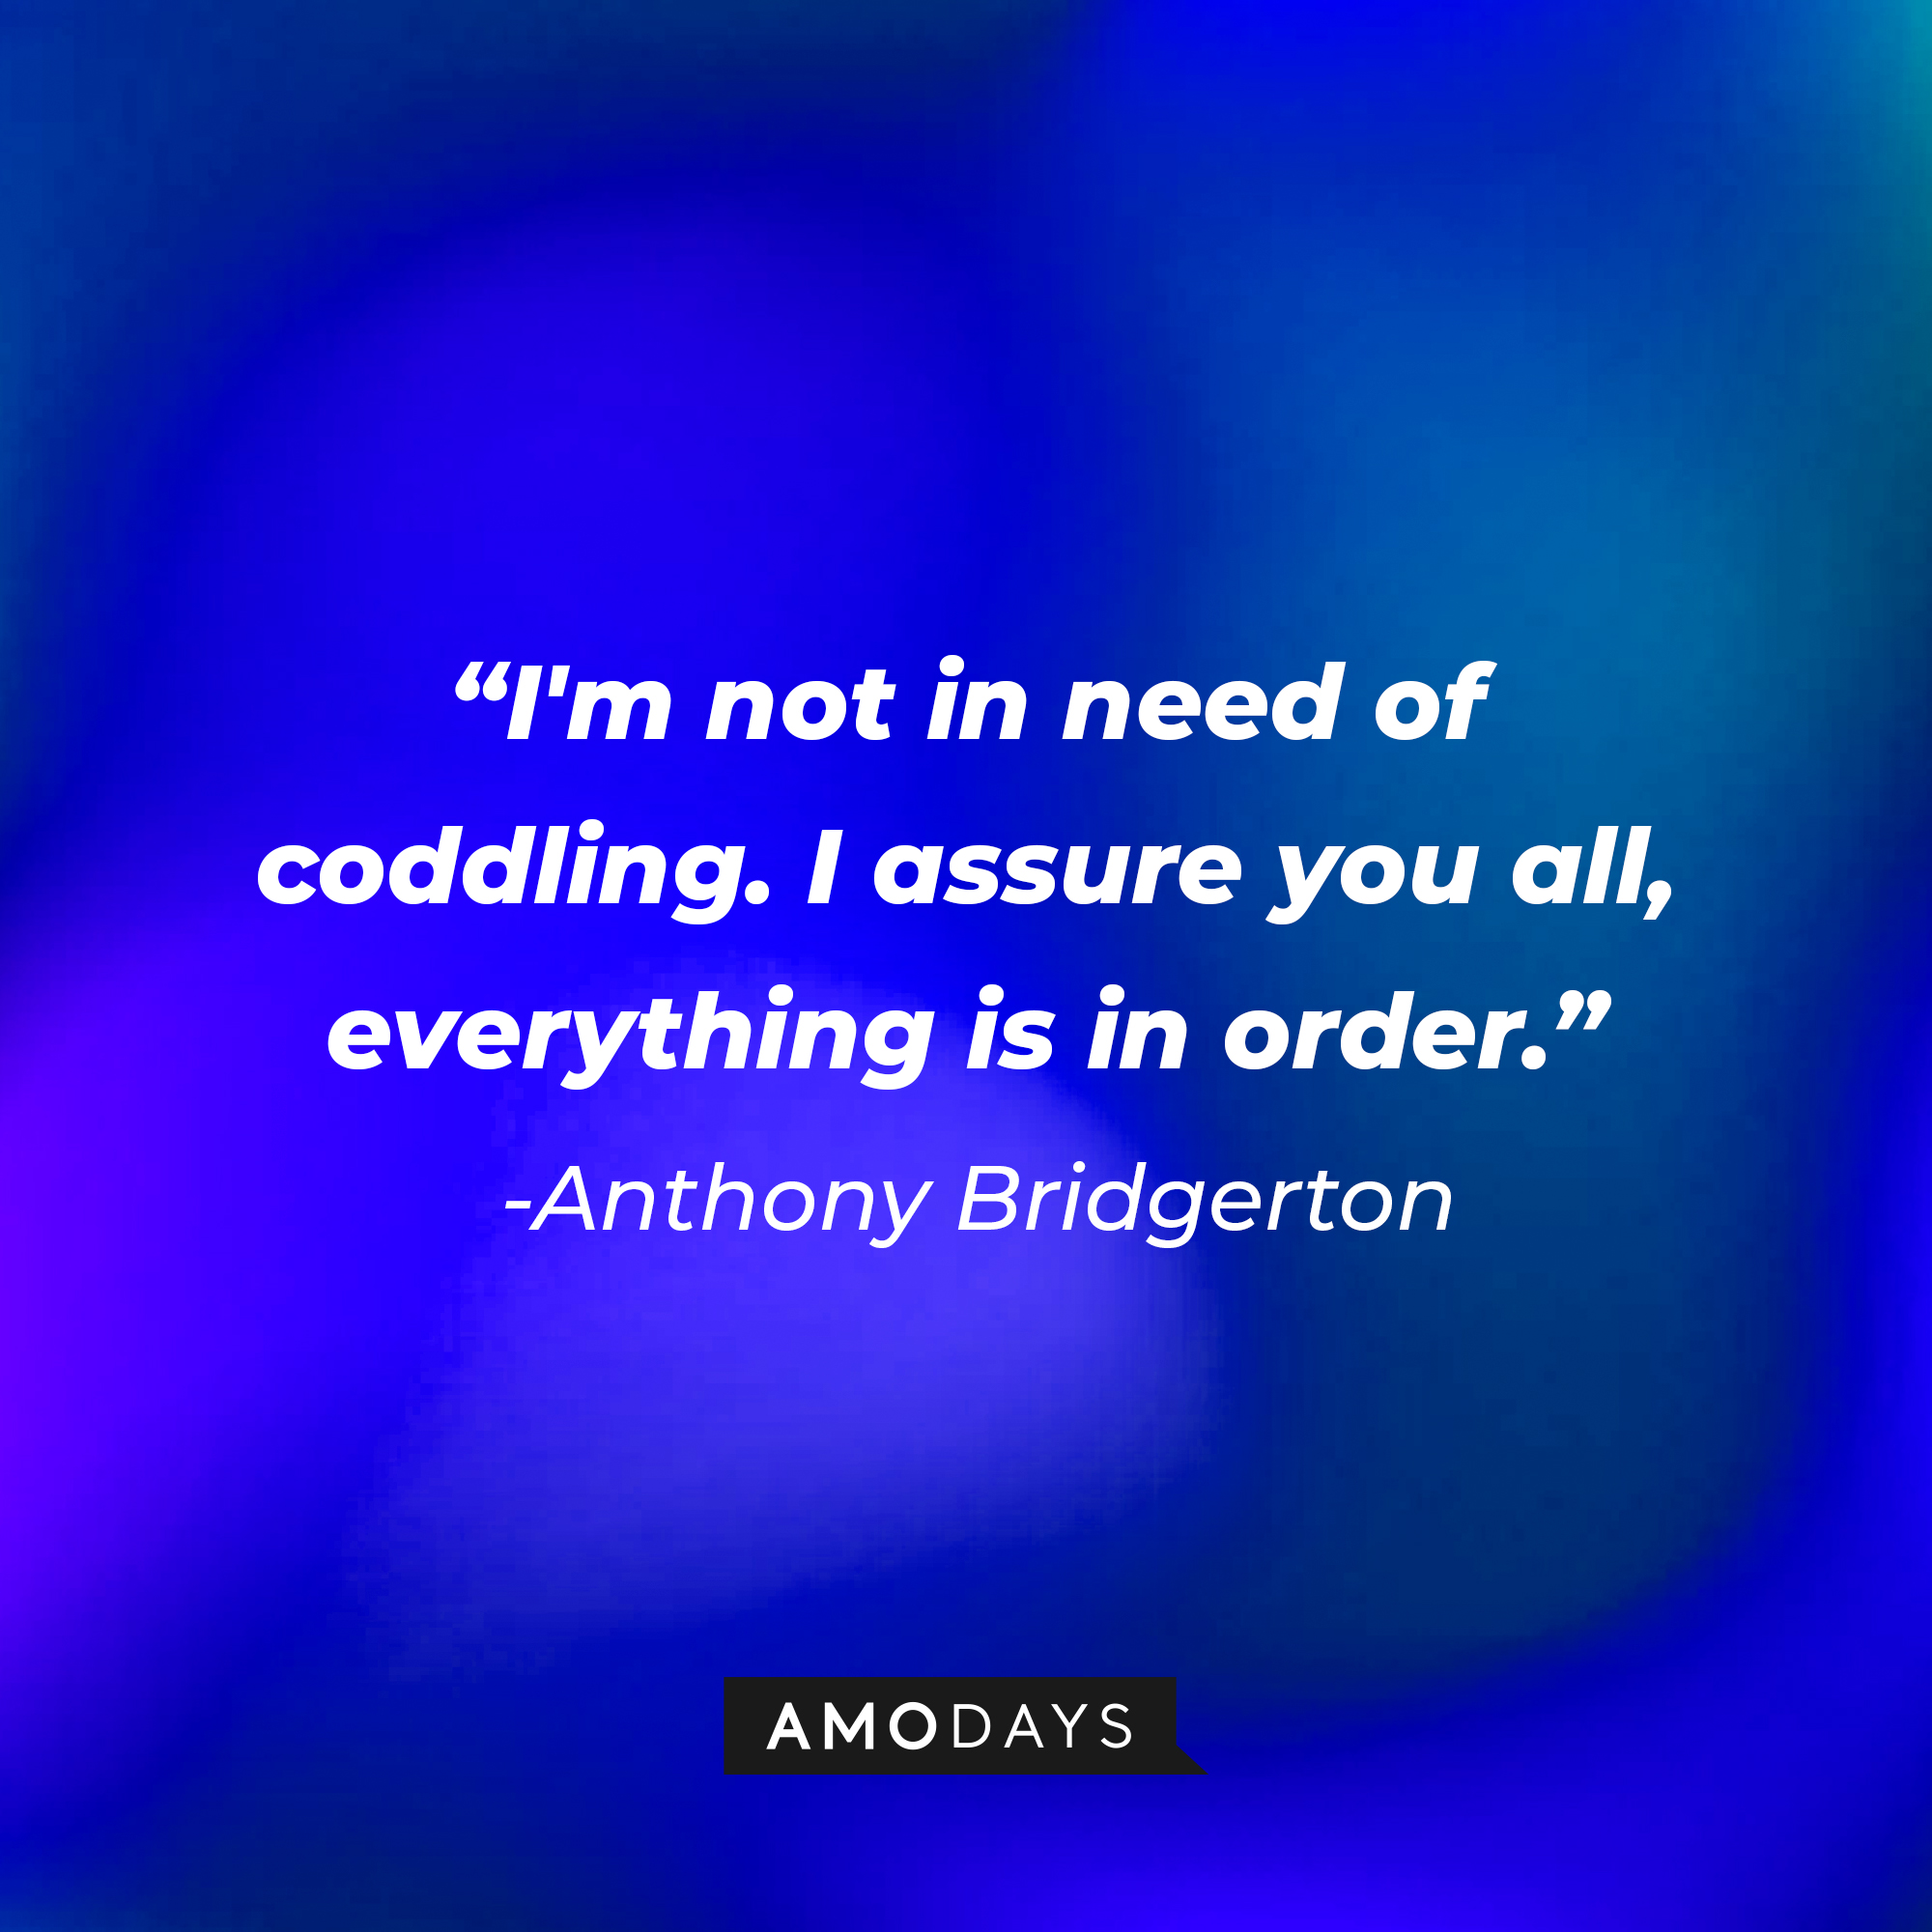 Anthony Bridgerton's quote: "I'm not in need of coddling. I assure you all, everything is in order." | Source: AmoDays